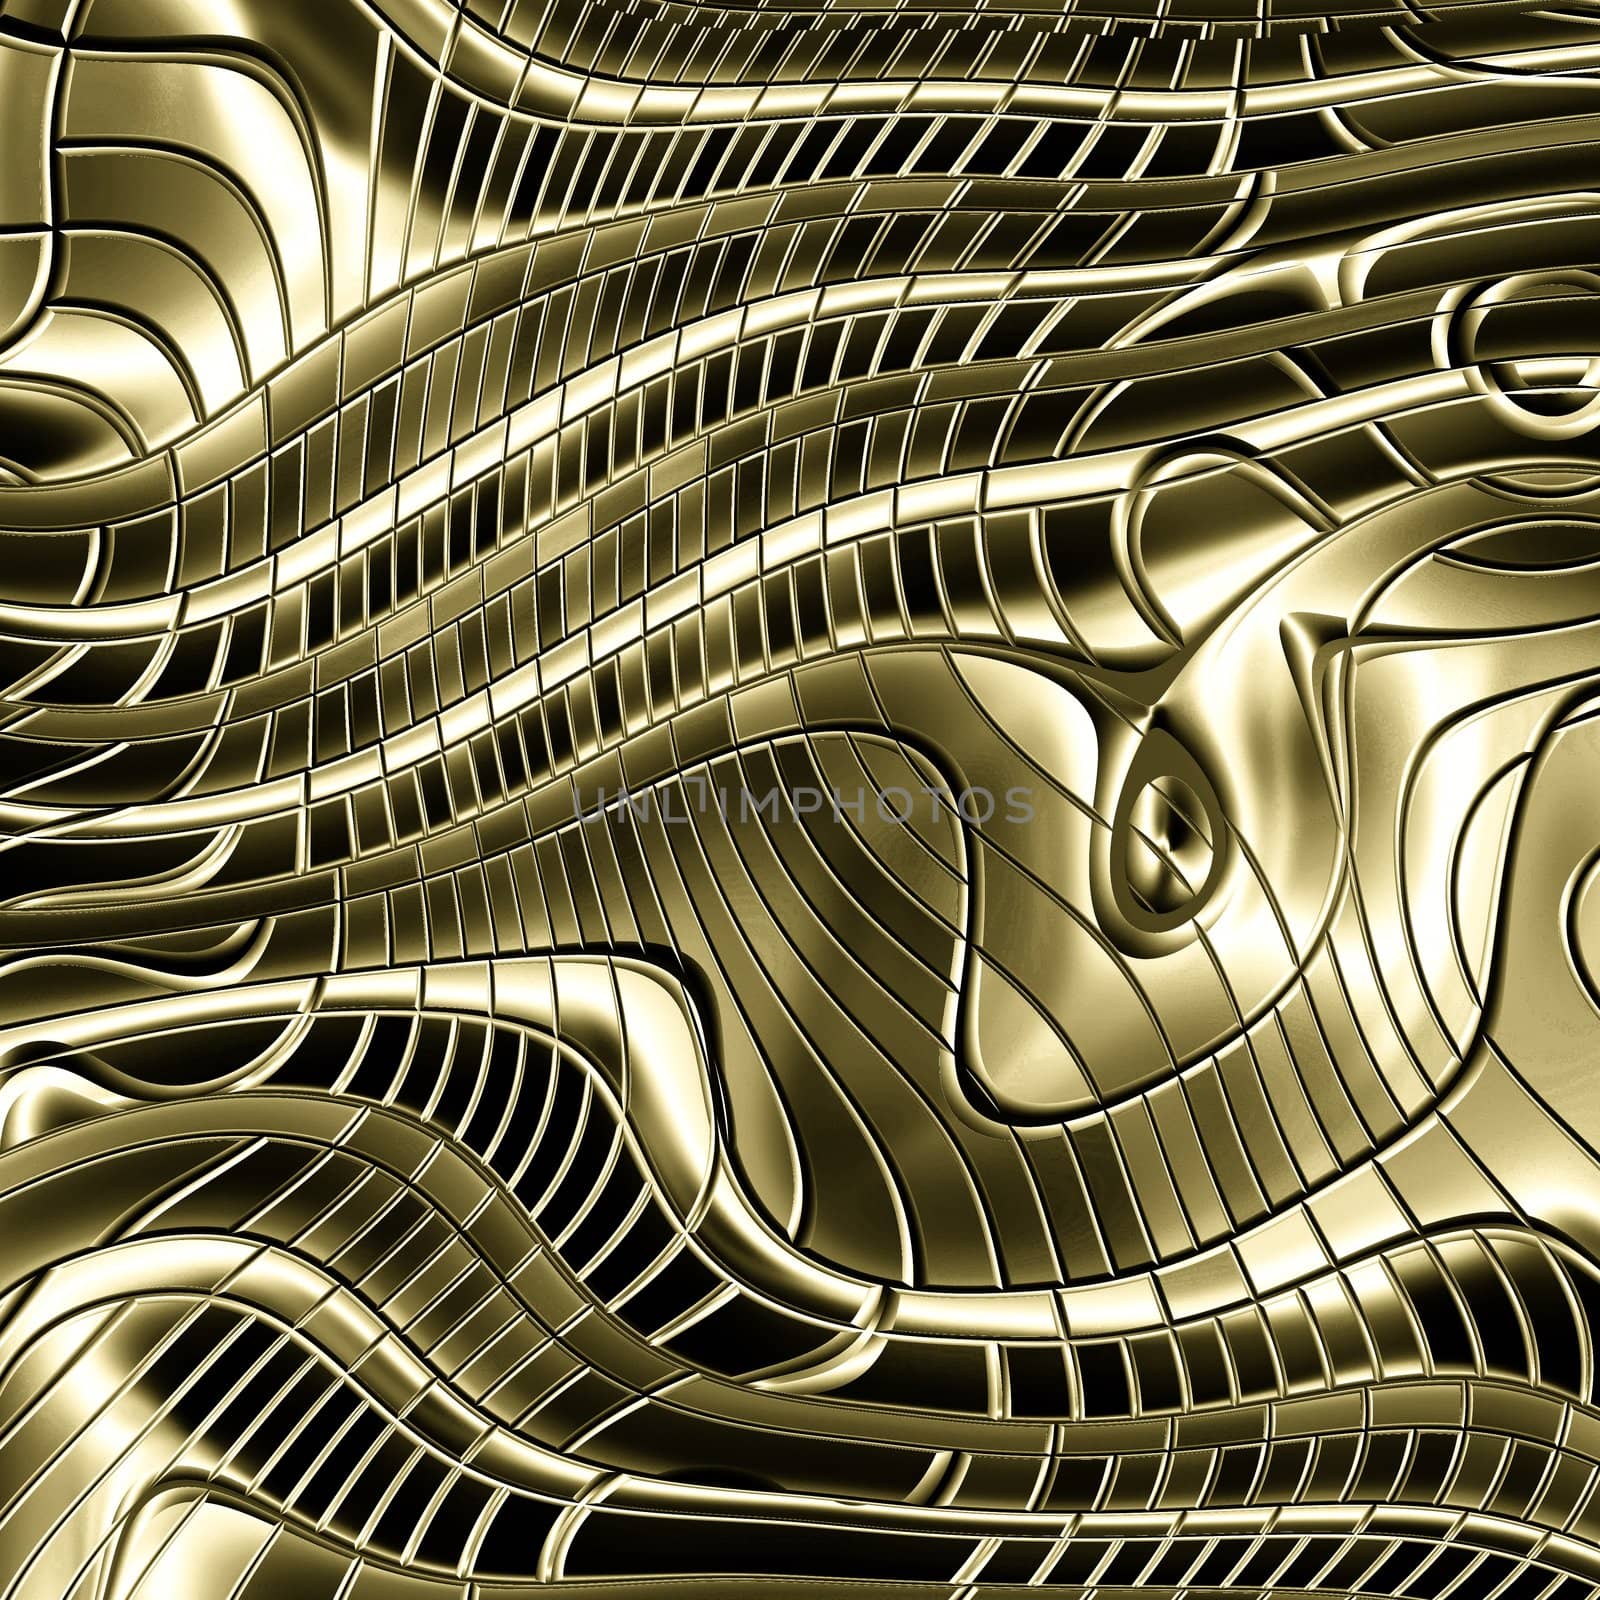 great image of an abstract gold metal background